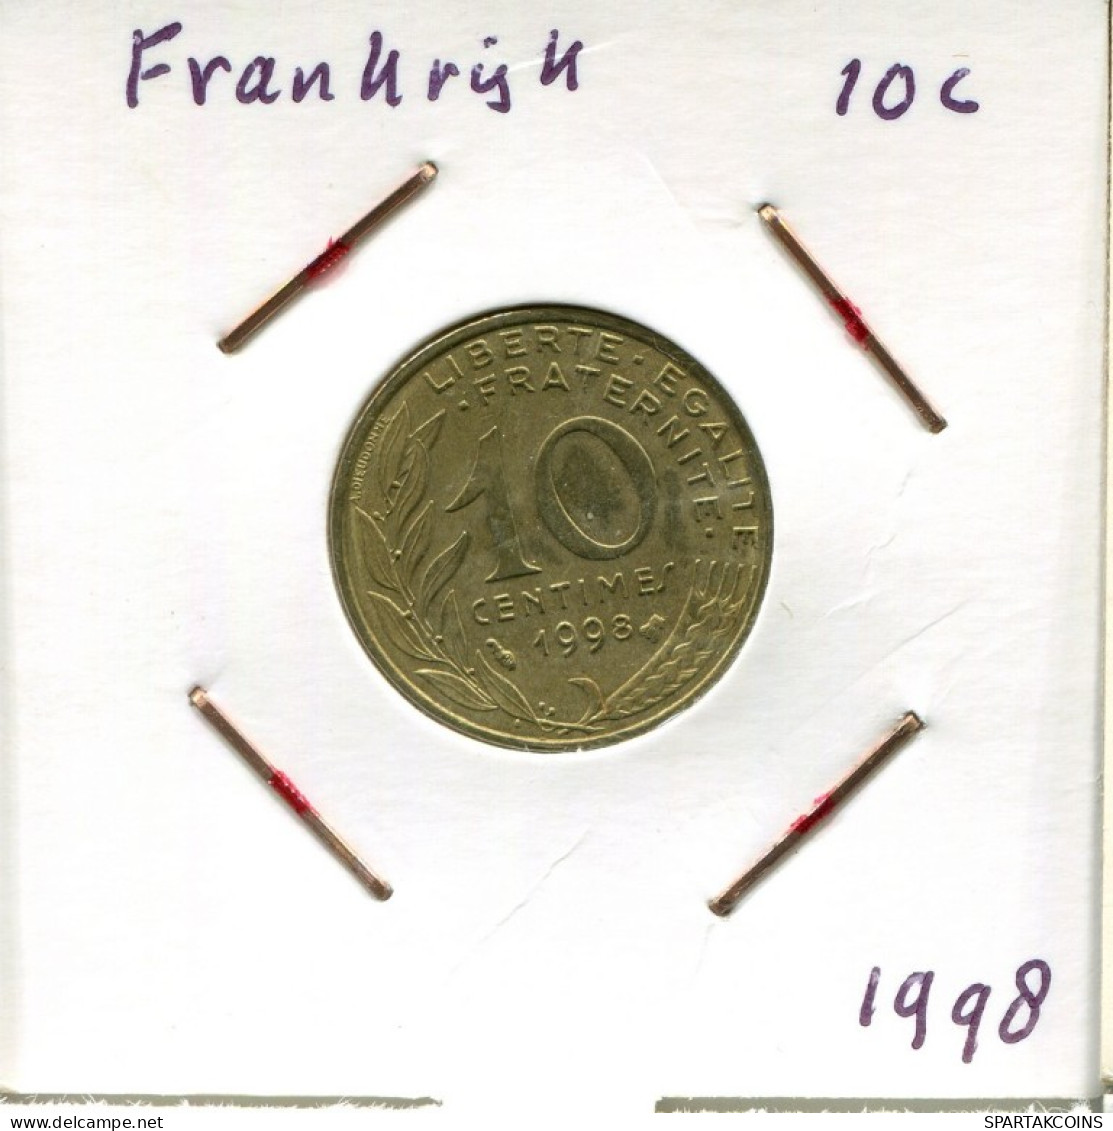 10 CENTIMES 1998 FRANCE Coin French Coin #AM839.U.A - 10 Centimes